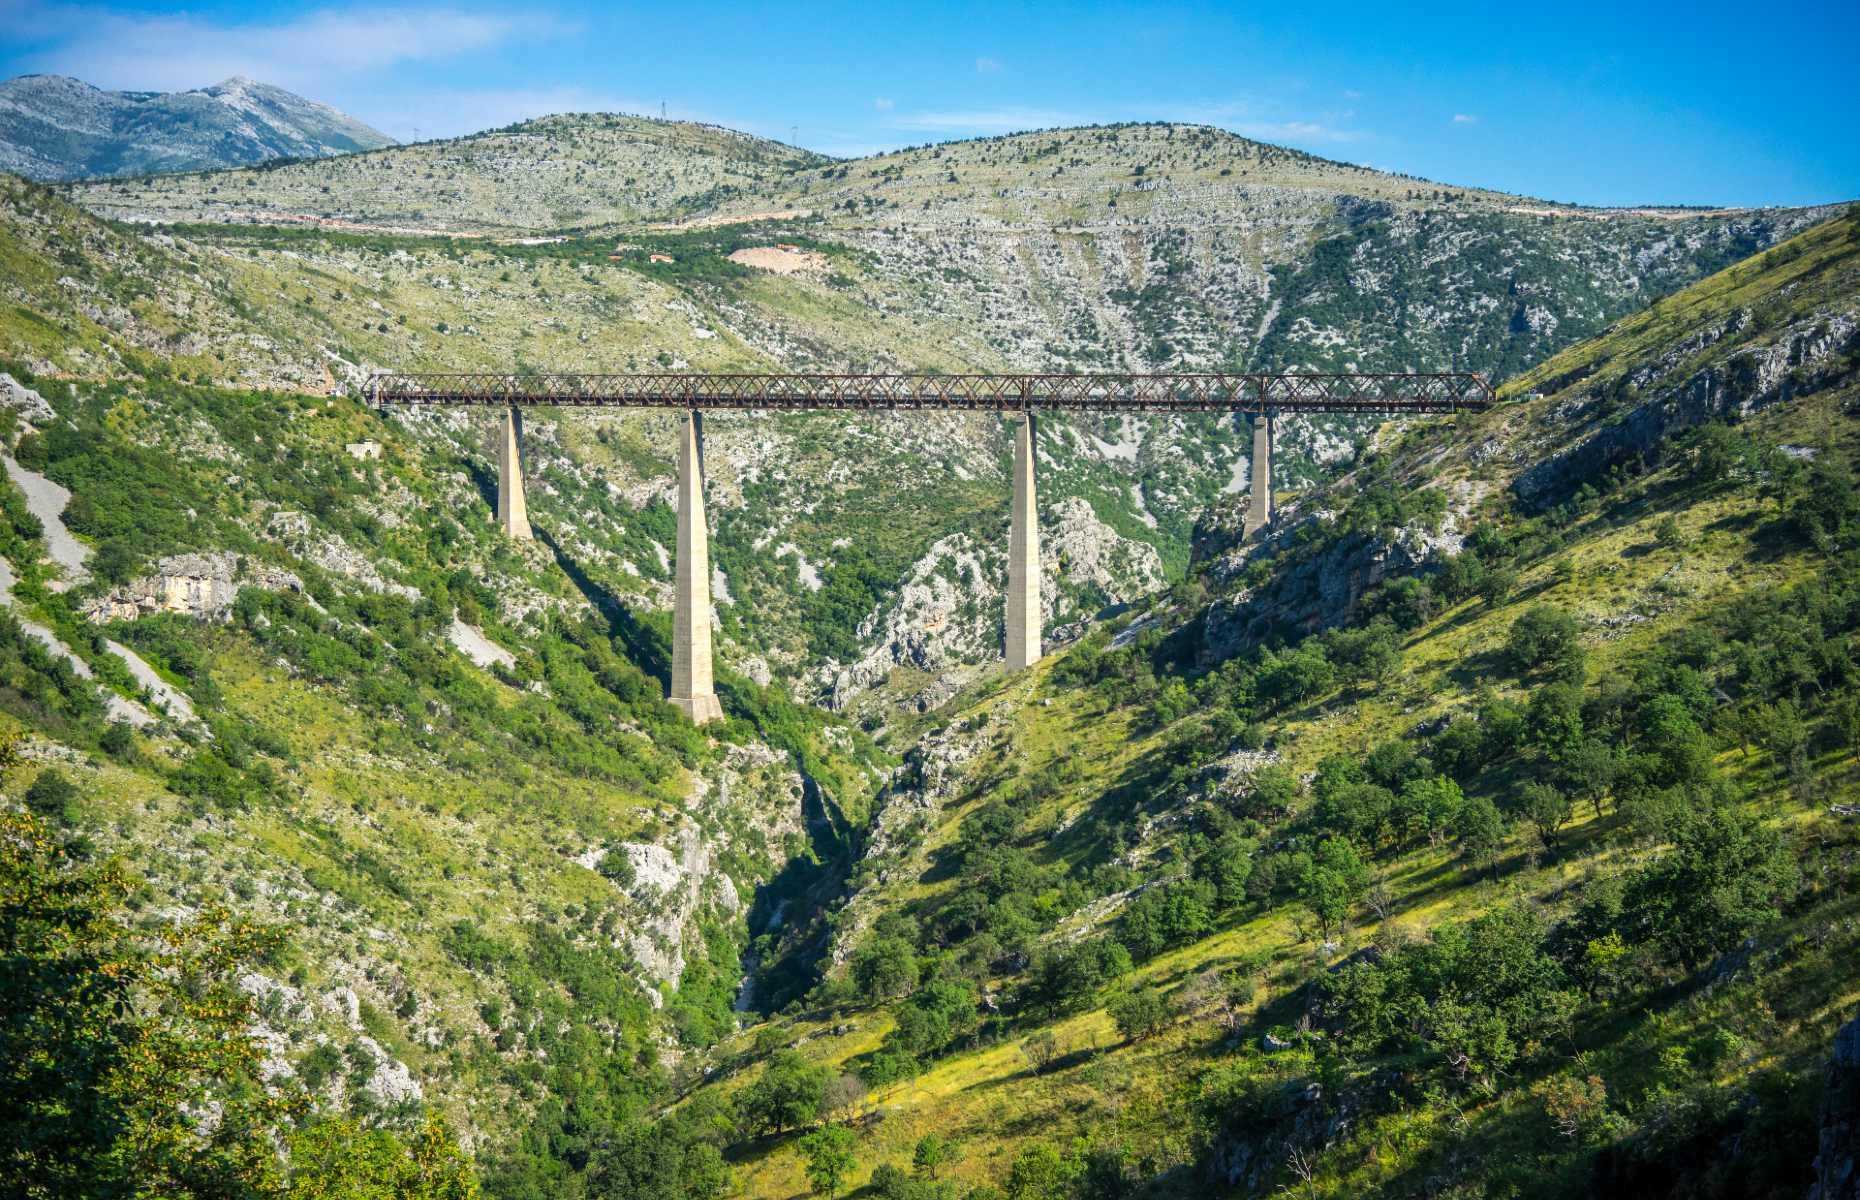 <p>There aren’t a whole lot of options for exploring the famously bus-heavy Balkans by rail, but this legendary 10-hour journey takes in some of the best scenery Serbia, Bosnia and Herzegovina and Montenegro have to offer. That includes this eye-wateringly high bridge, which teeters 656 feet (200m) above the Mala Rijeka viaduct (until 2001 it was the highest railway bridge in the world). But it’s one of just 435 bridges along the route – necessary to cross all the mountains and gorges. </p>